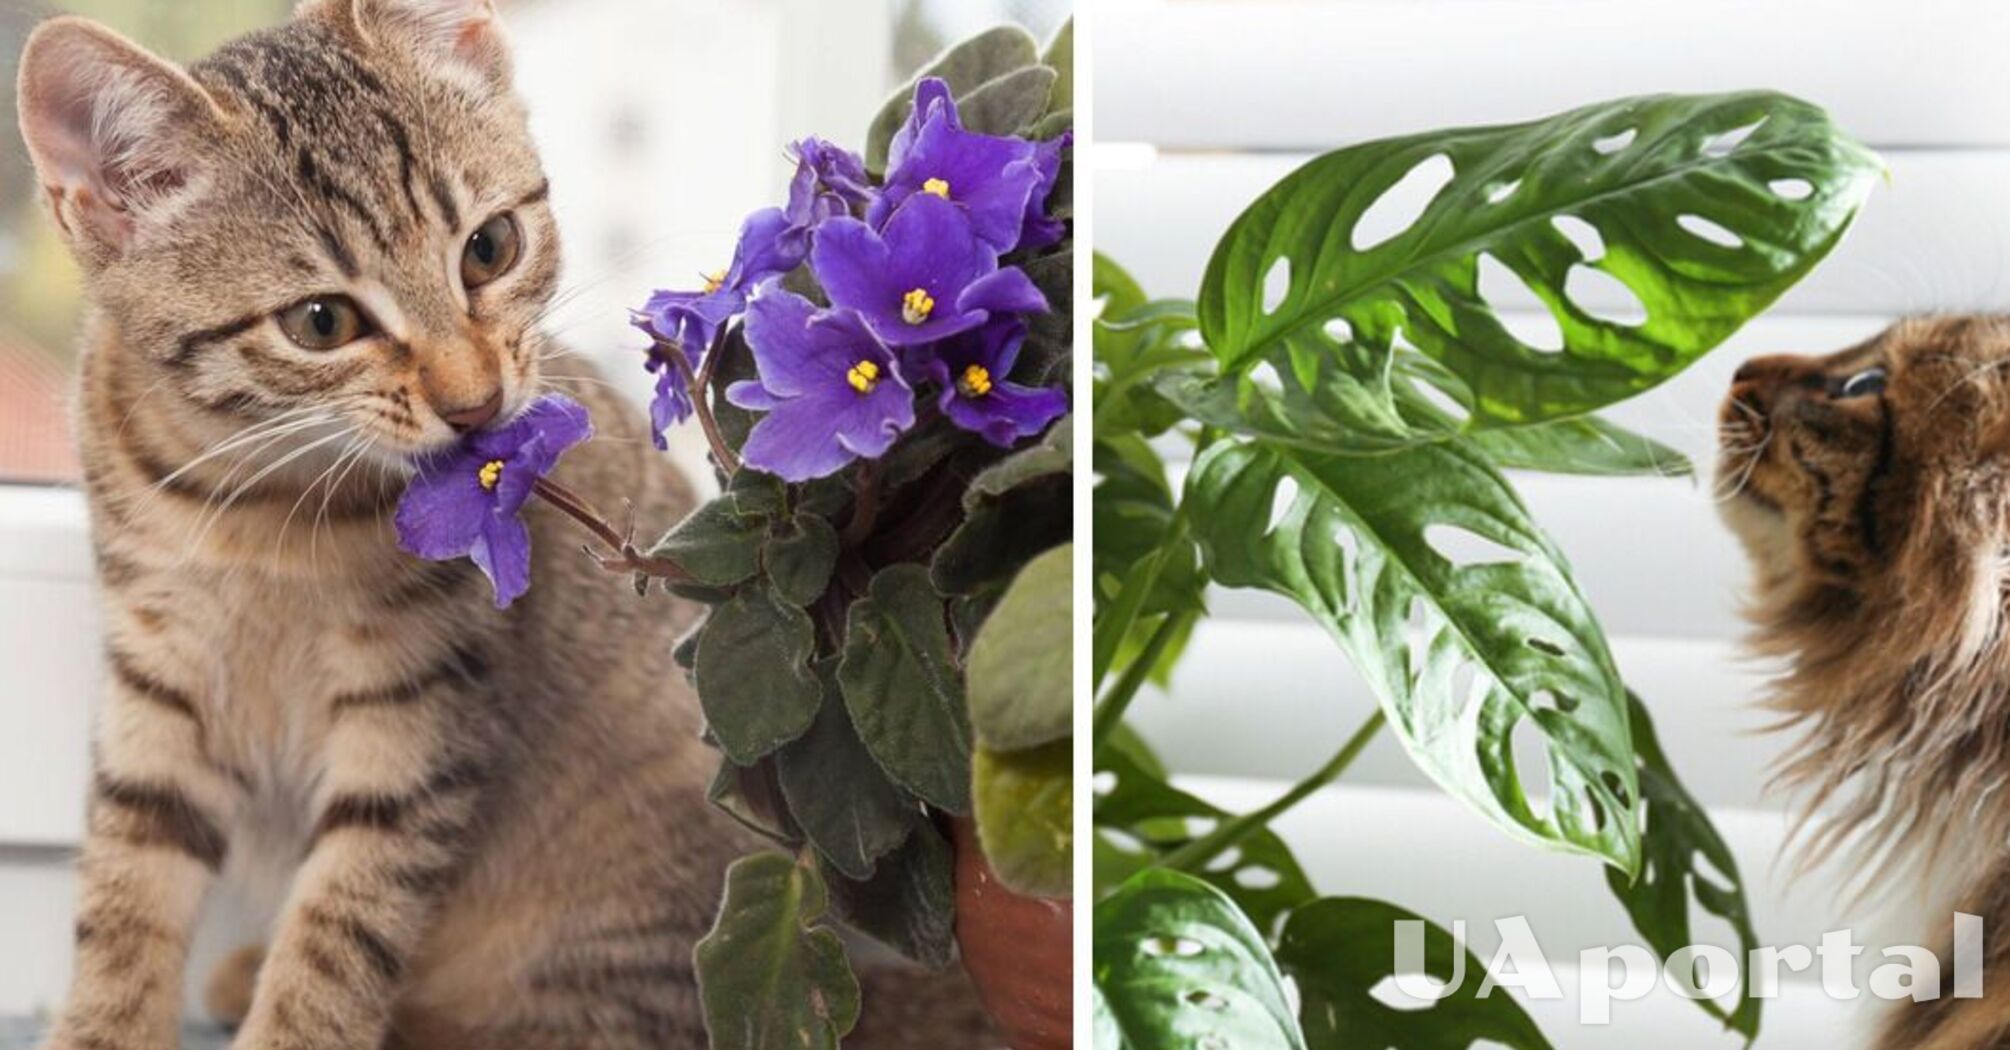 What to do to stop your cat from eating houseplants